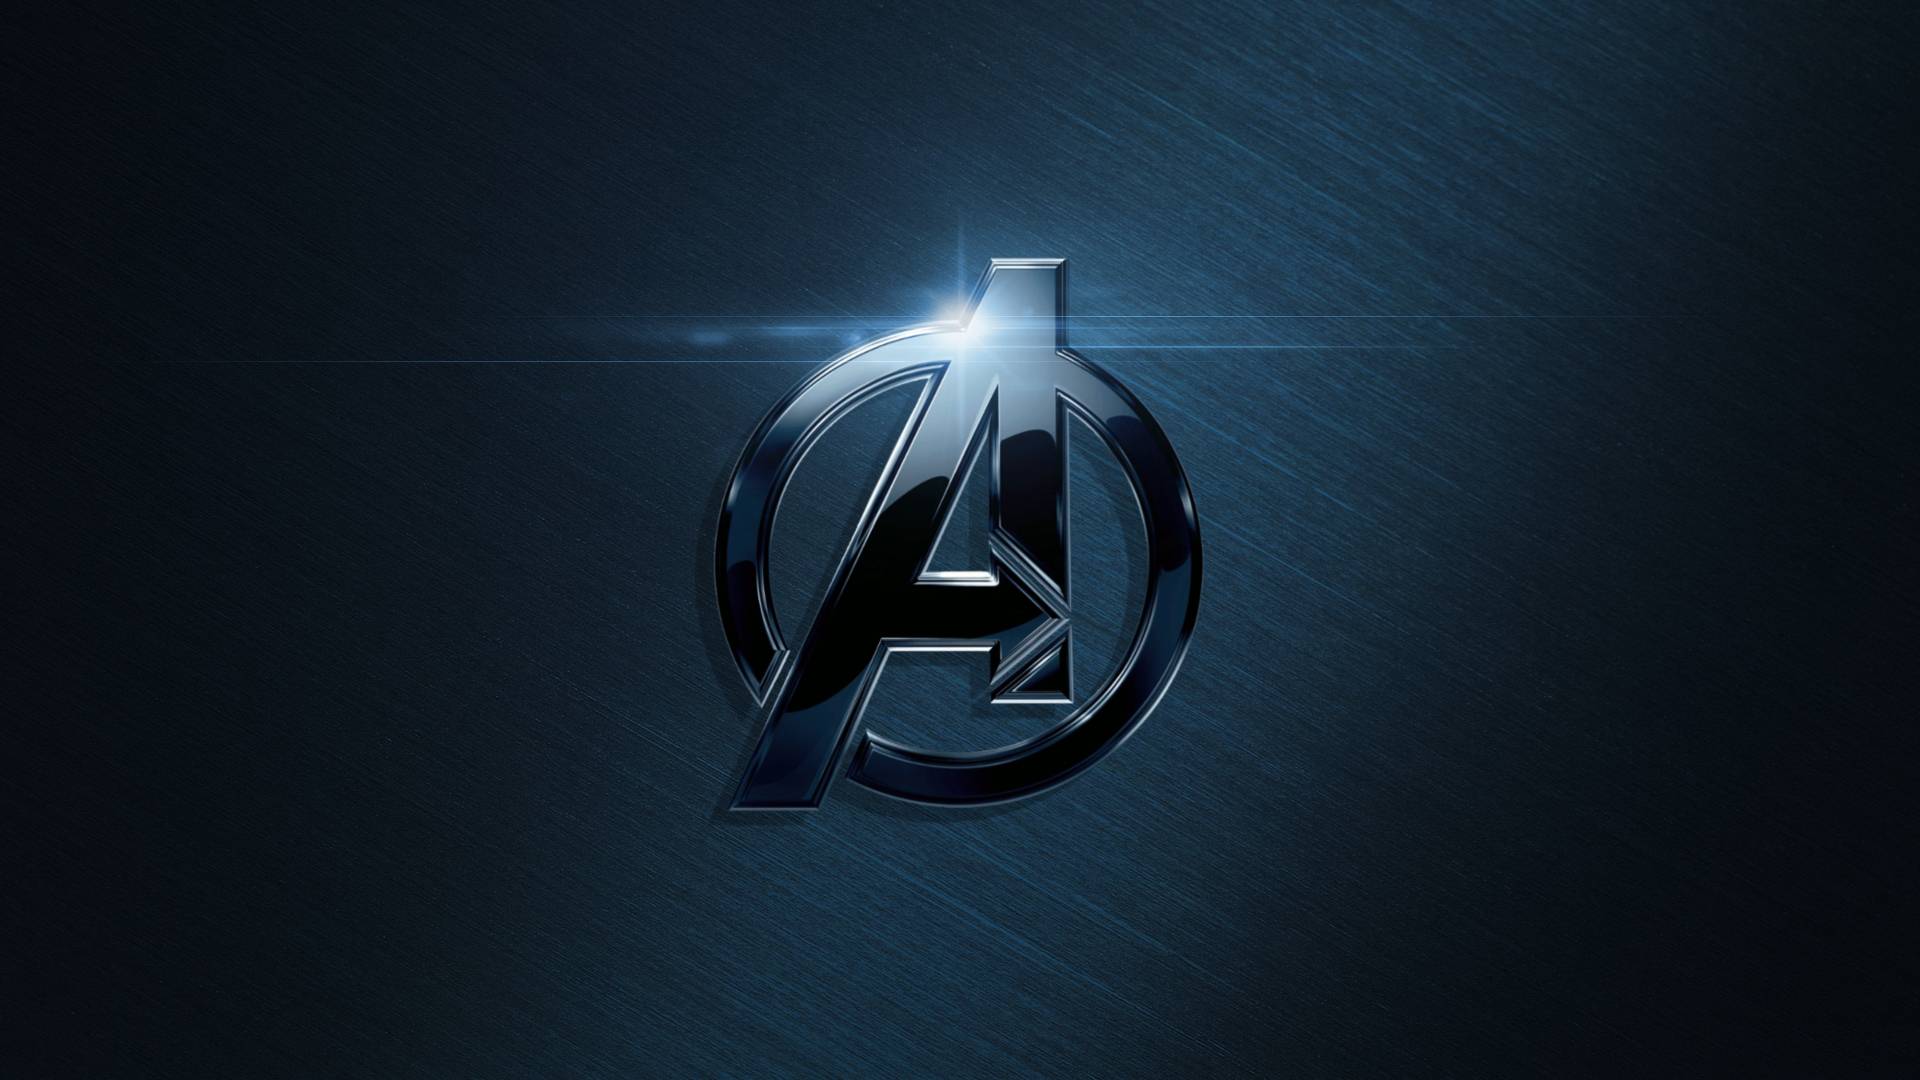 The Avengers HD Wallpaper Your Geeky